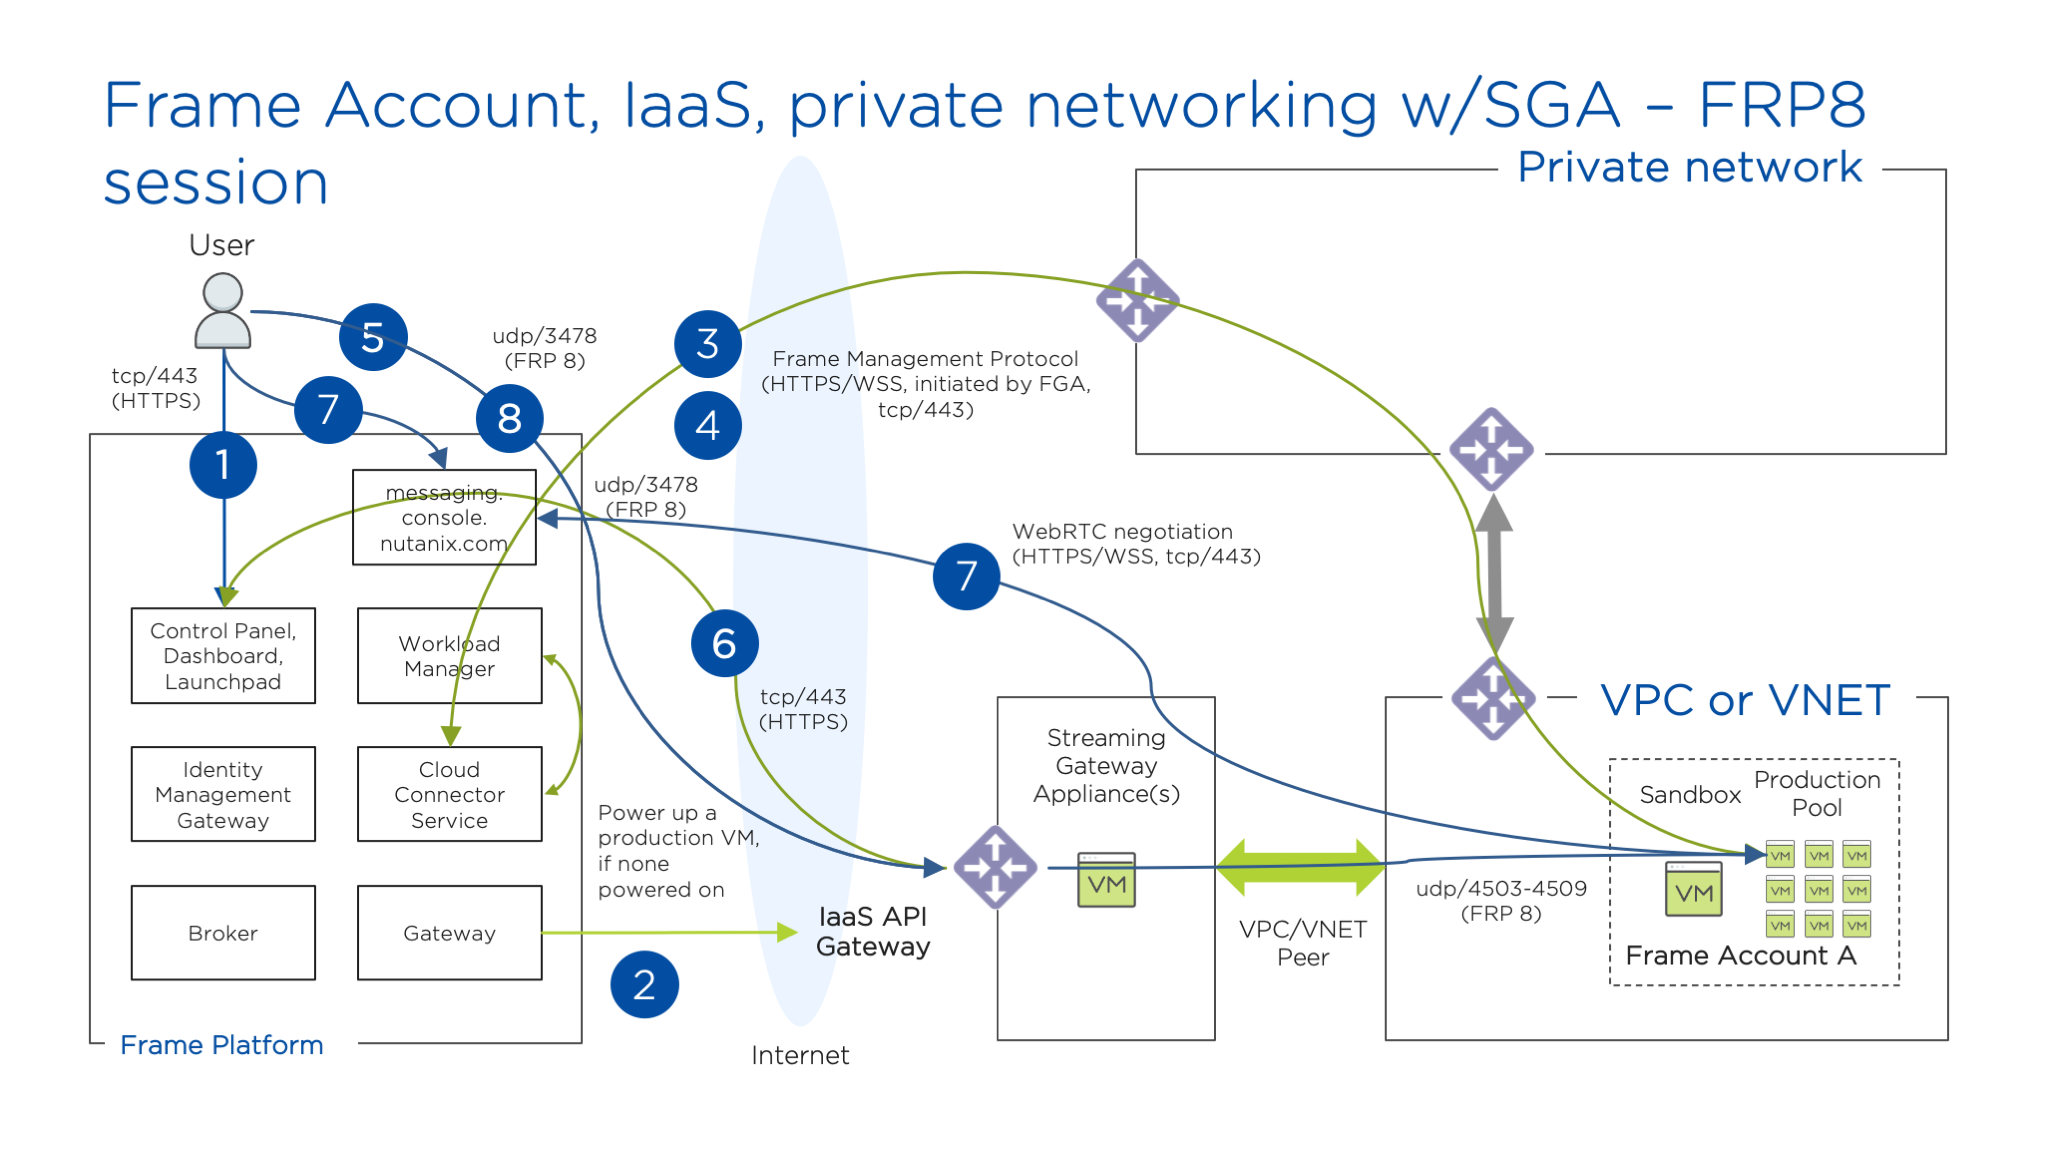 Public IaaS - Private Networking with SGA (FRP8)